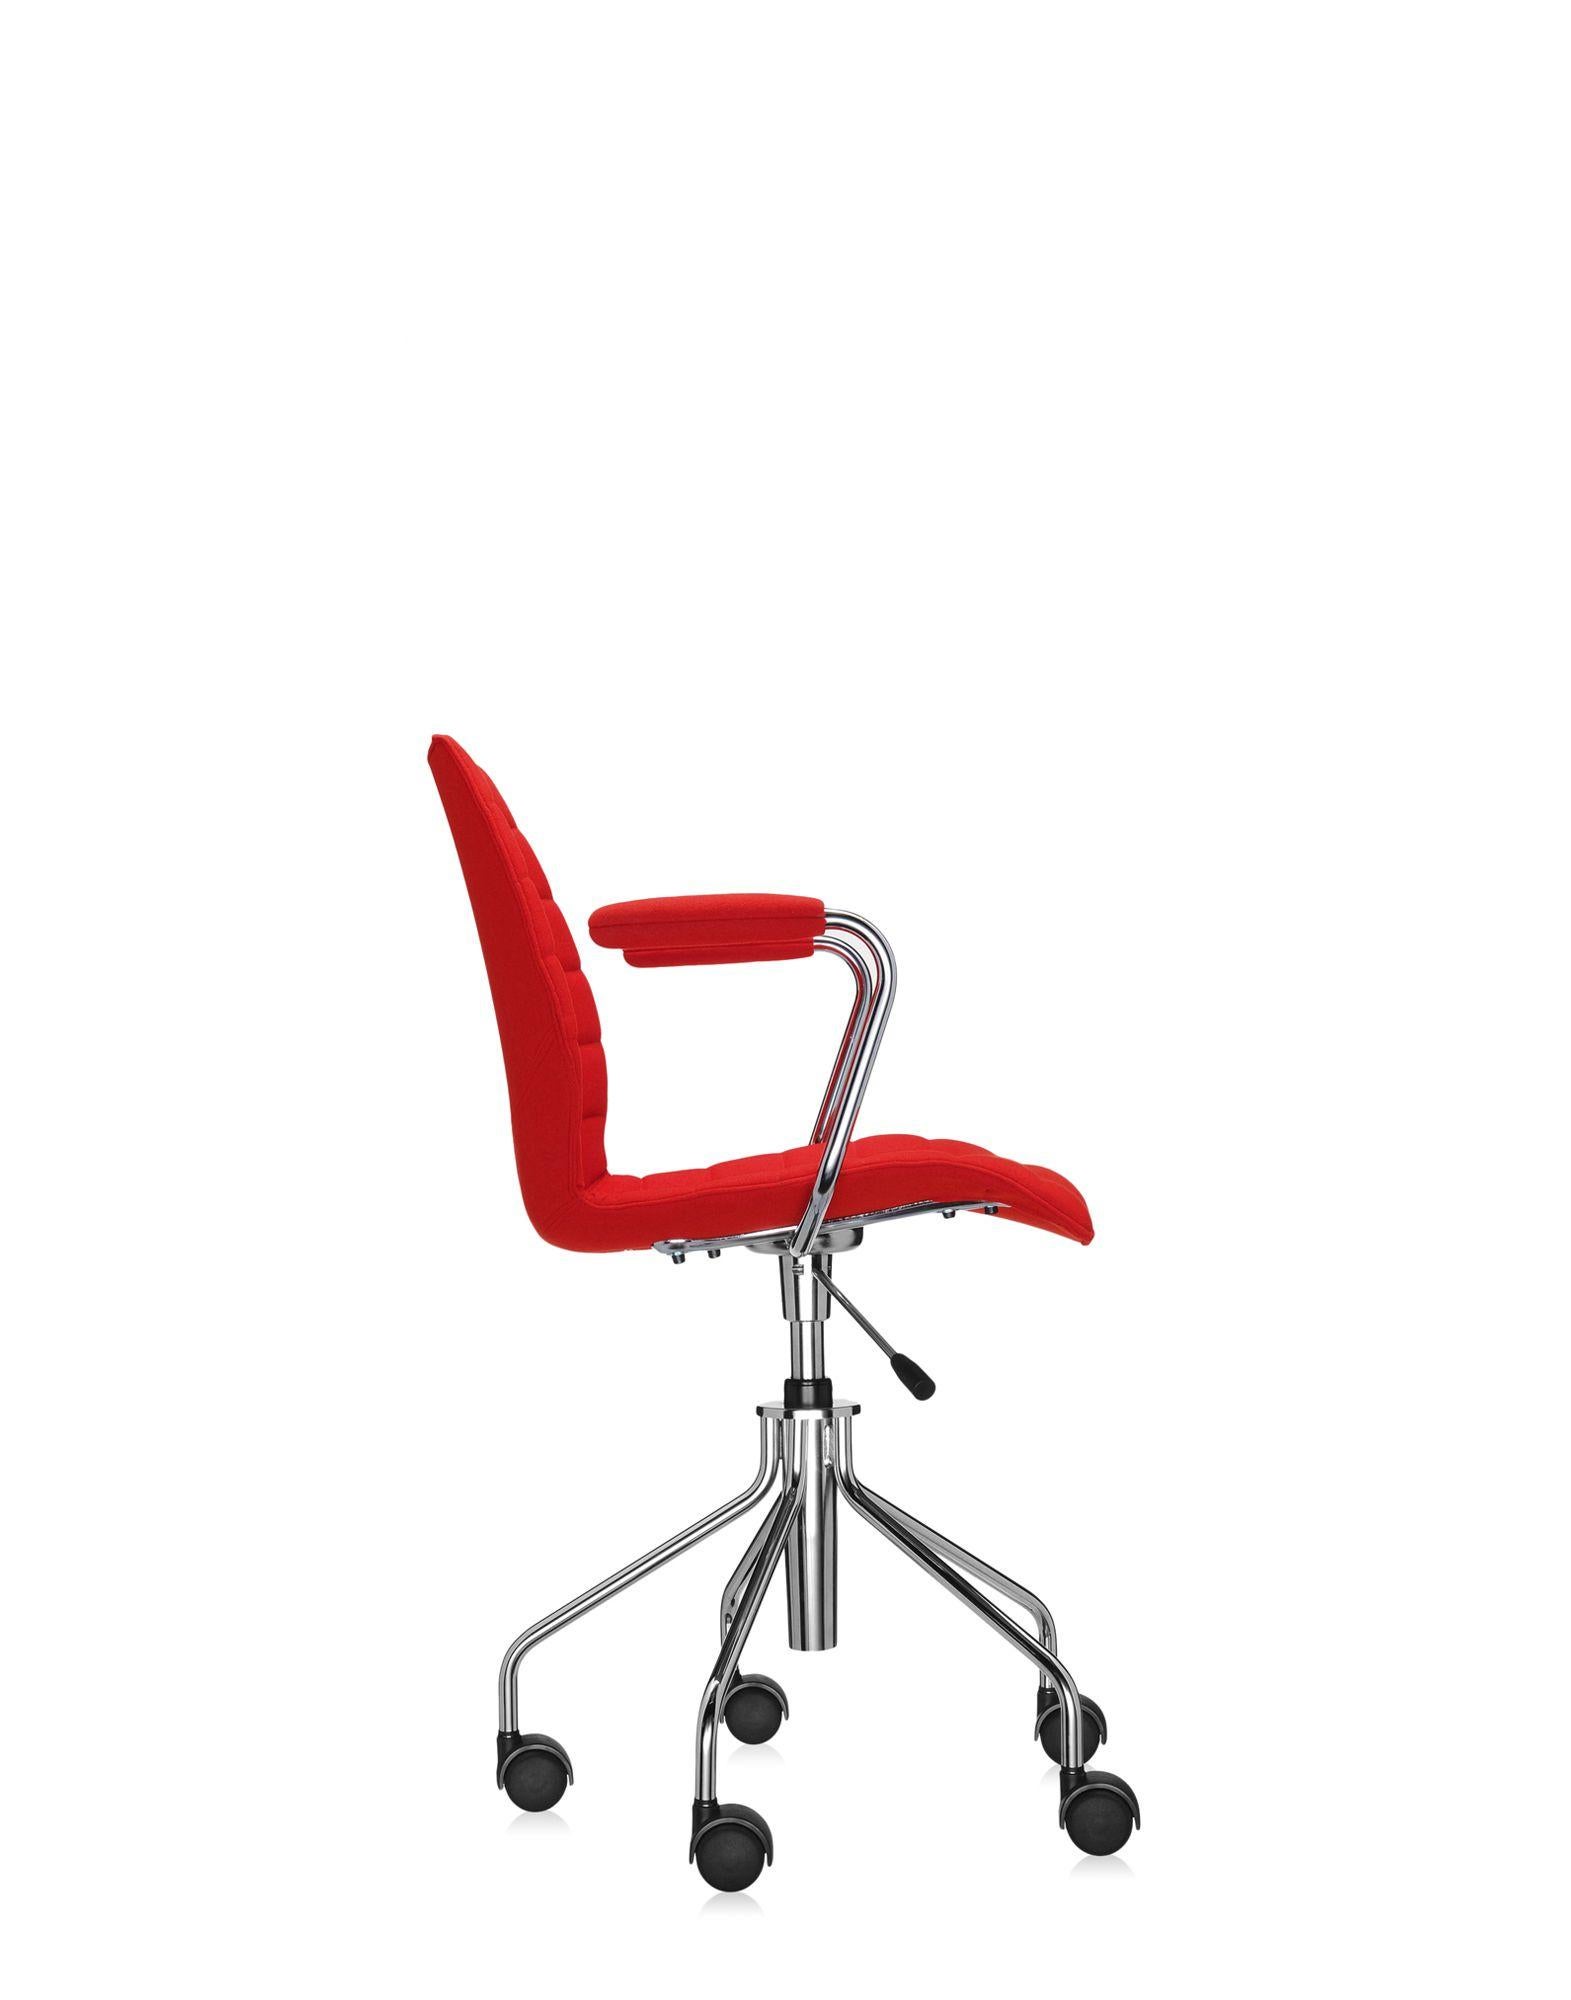 Modern Kartell Maui Soft Trevira ArmChair in Red by Vico Magistretti